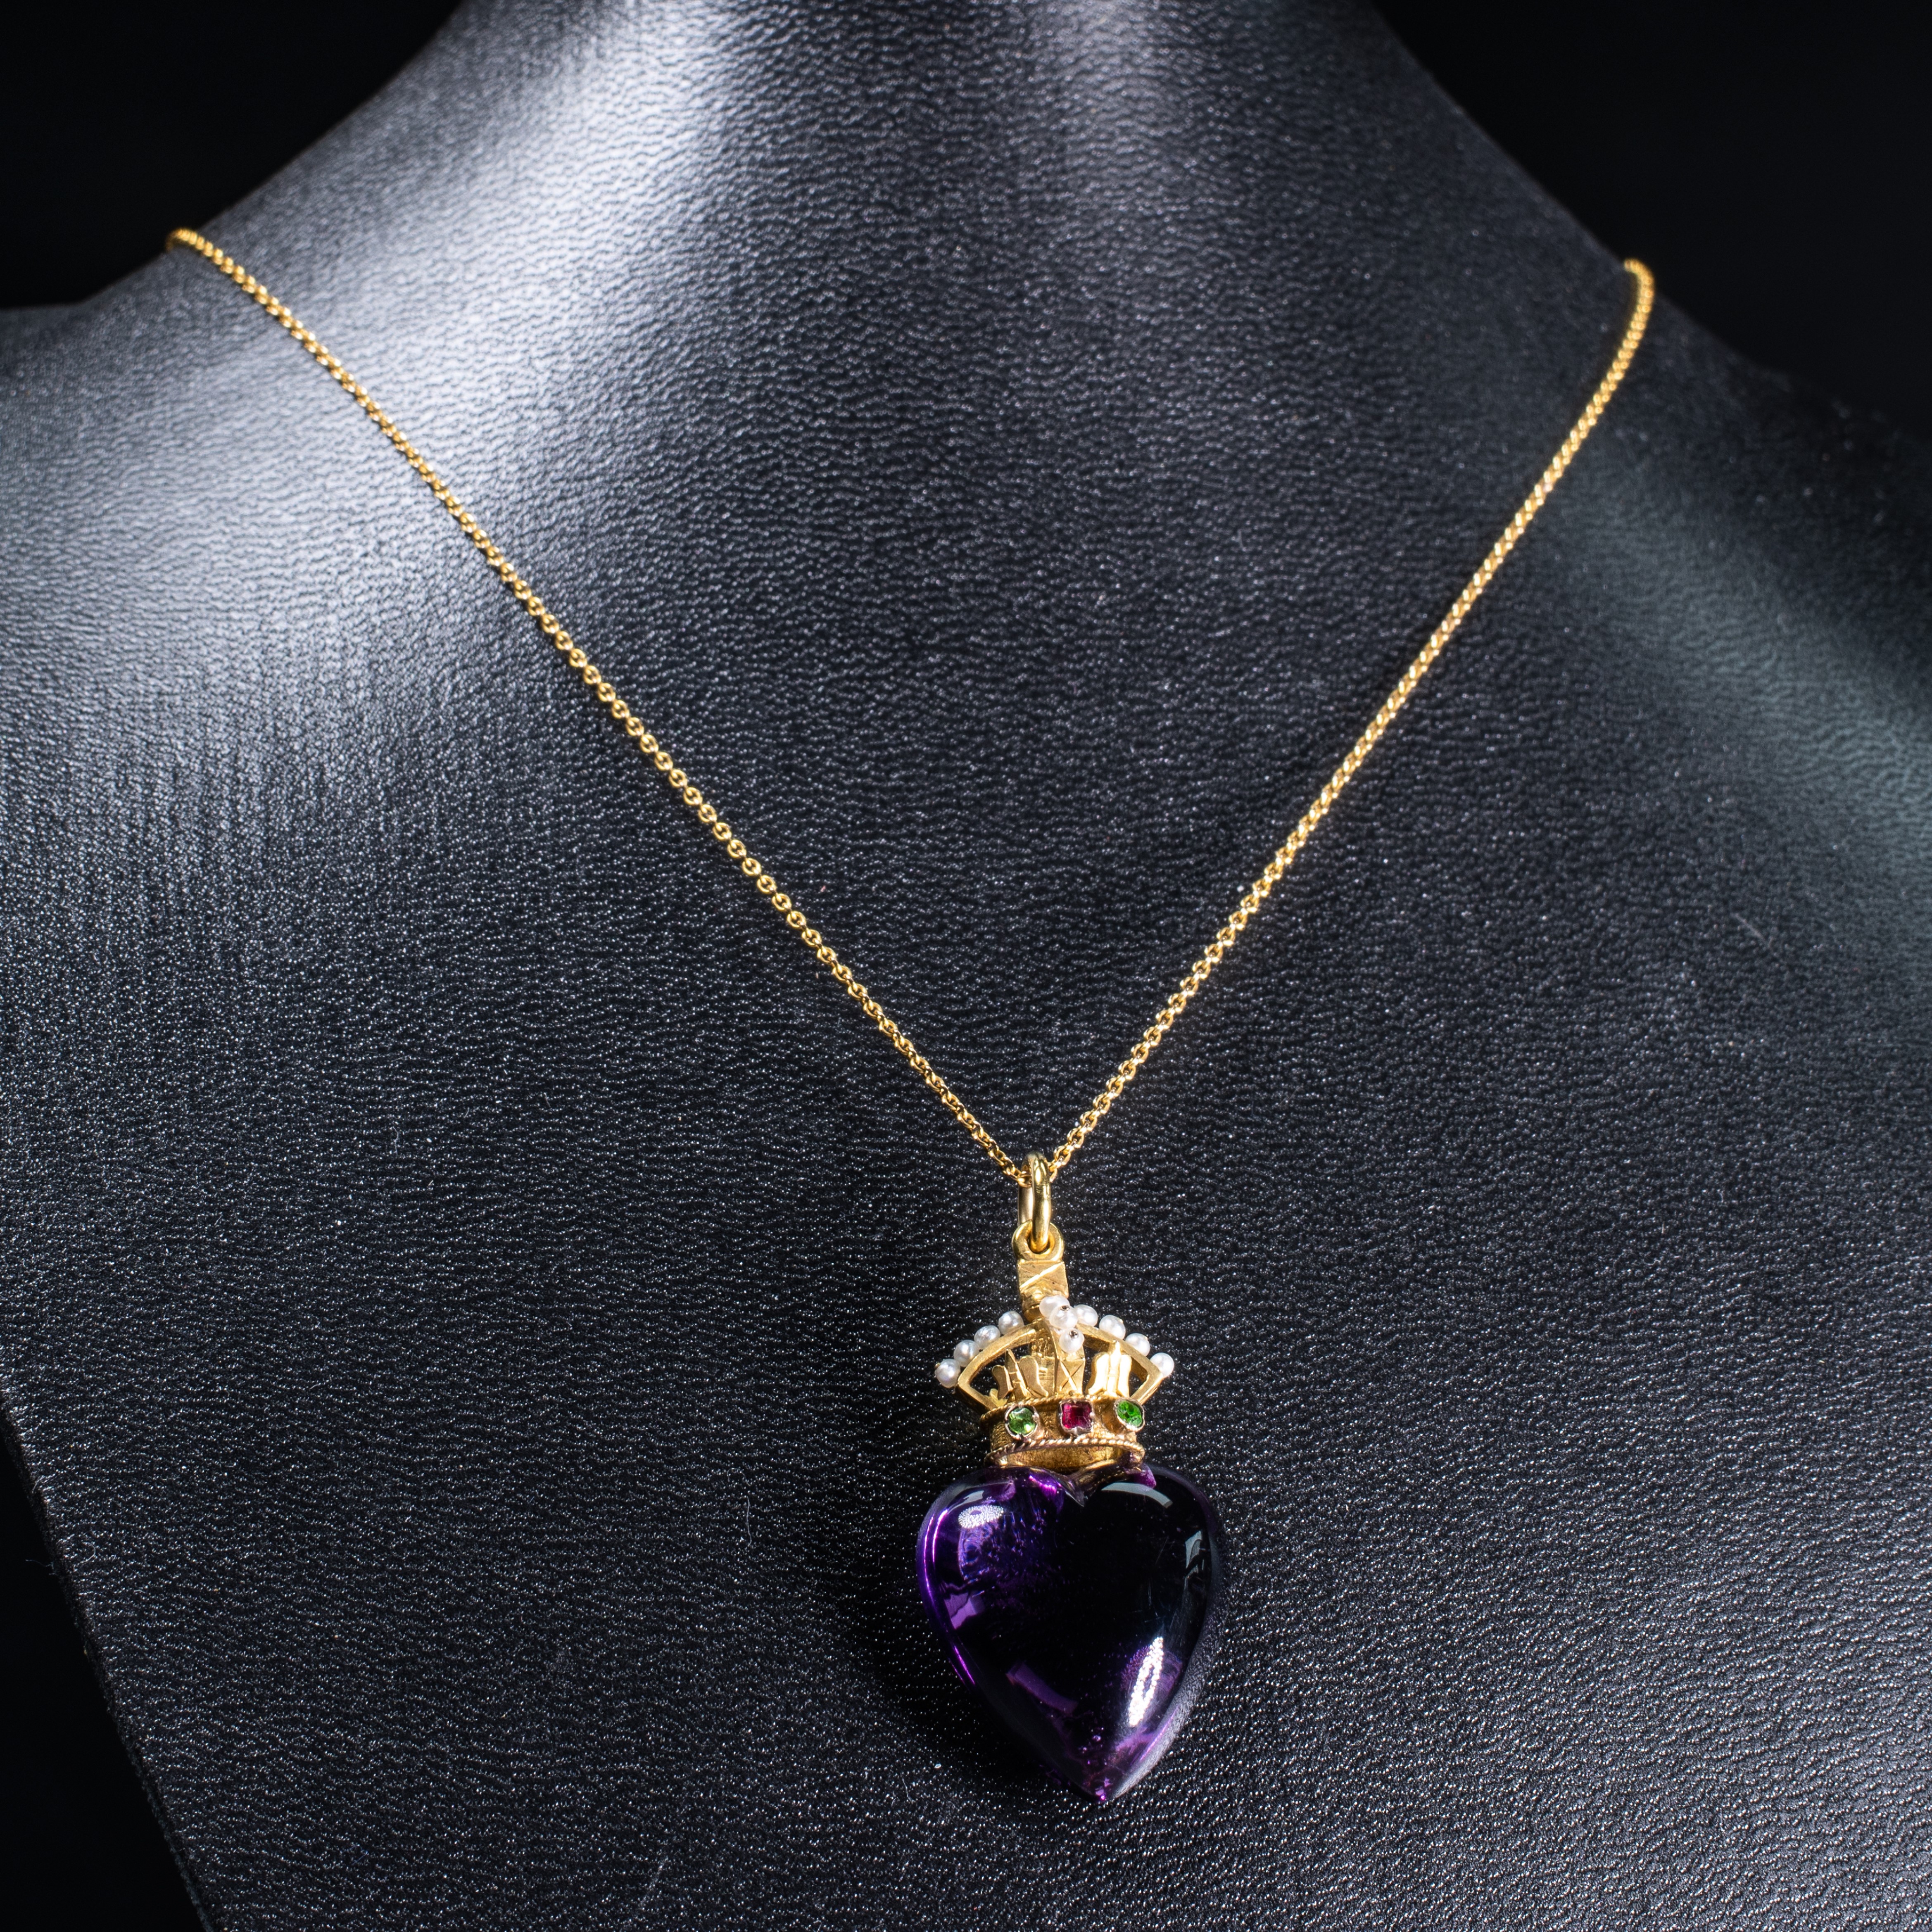 A VICTORIAN AMETHYST PENDANT - Image 3 of 4